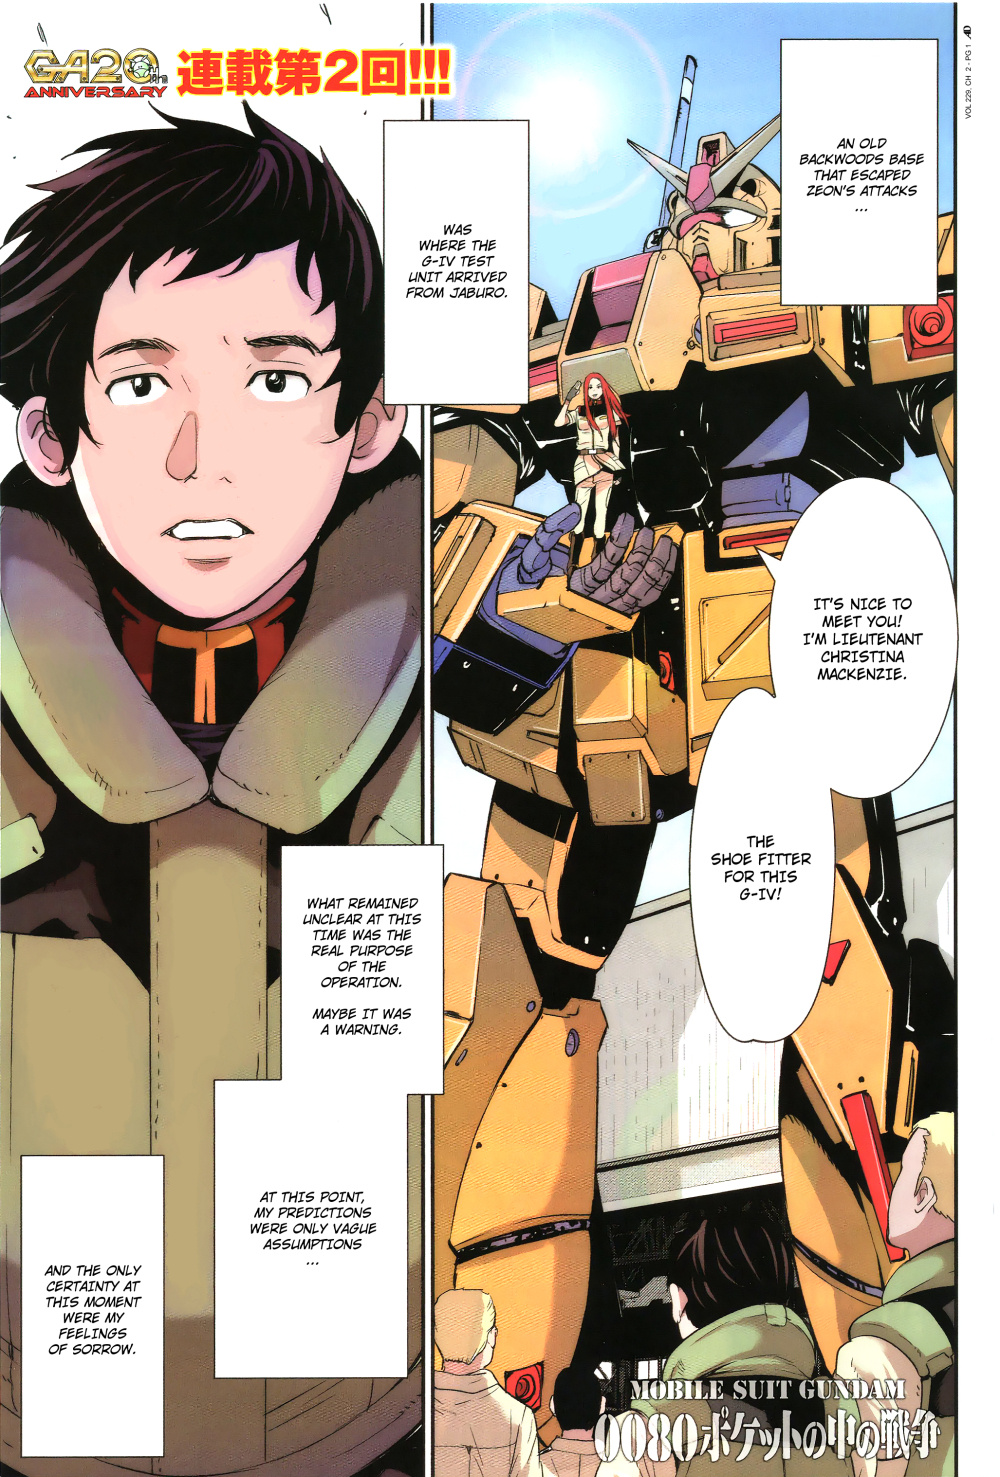 Mobile Suit Gundam 0080 - War In The Pocket - chapter 2 - #1